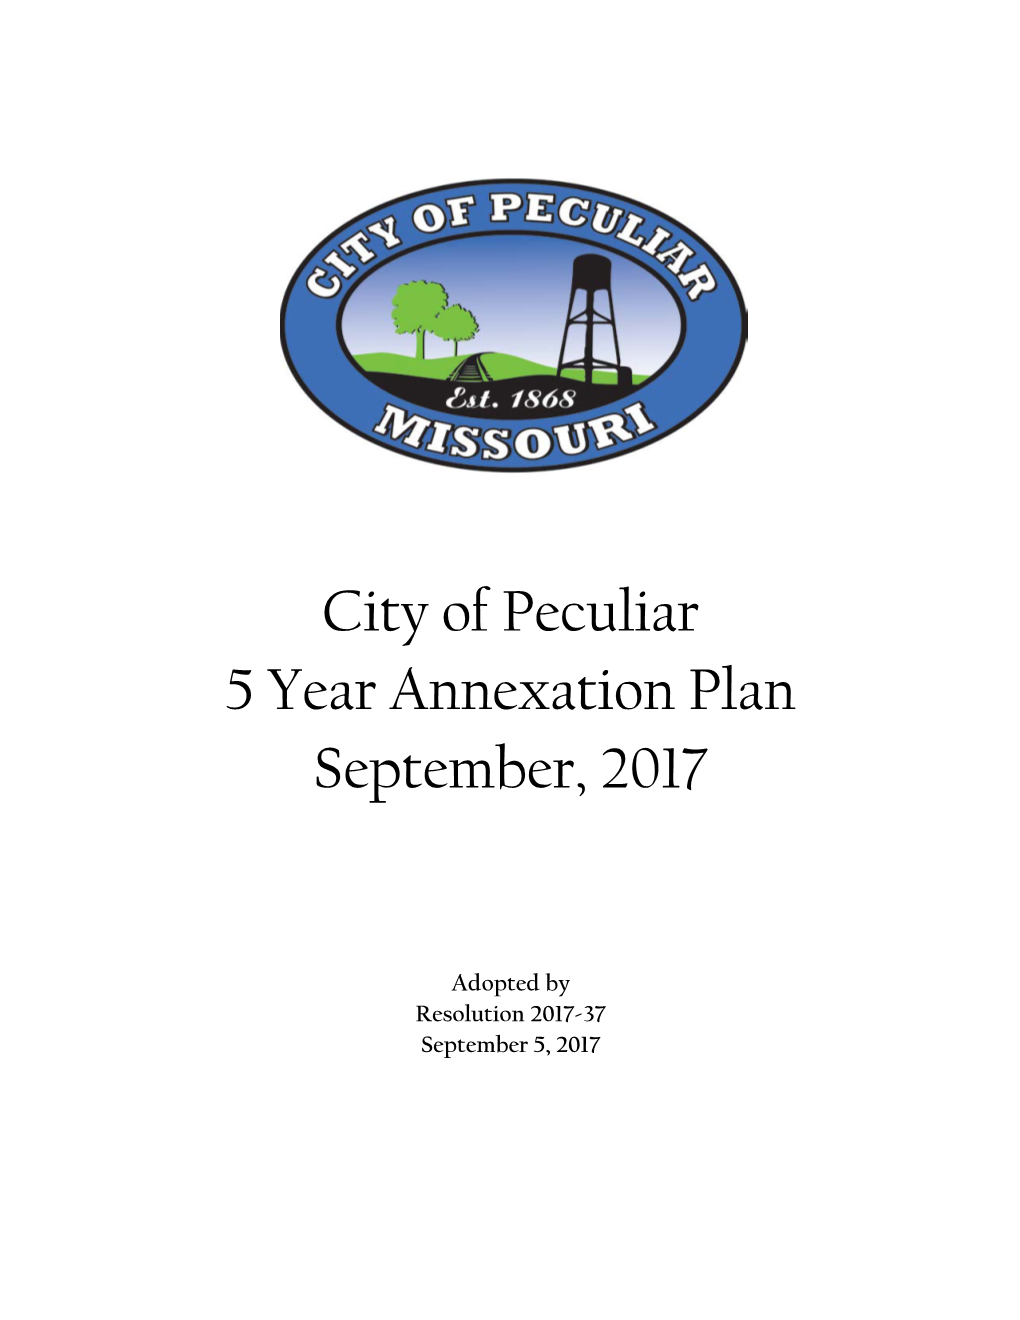 City of Peculiar 5 Year Annexation Plan September, 2017